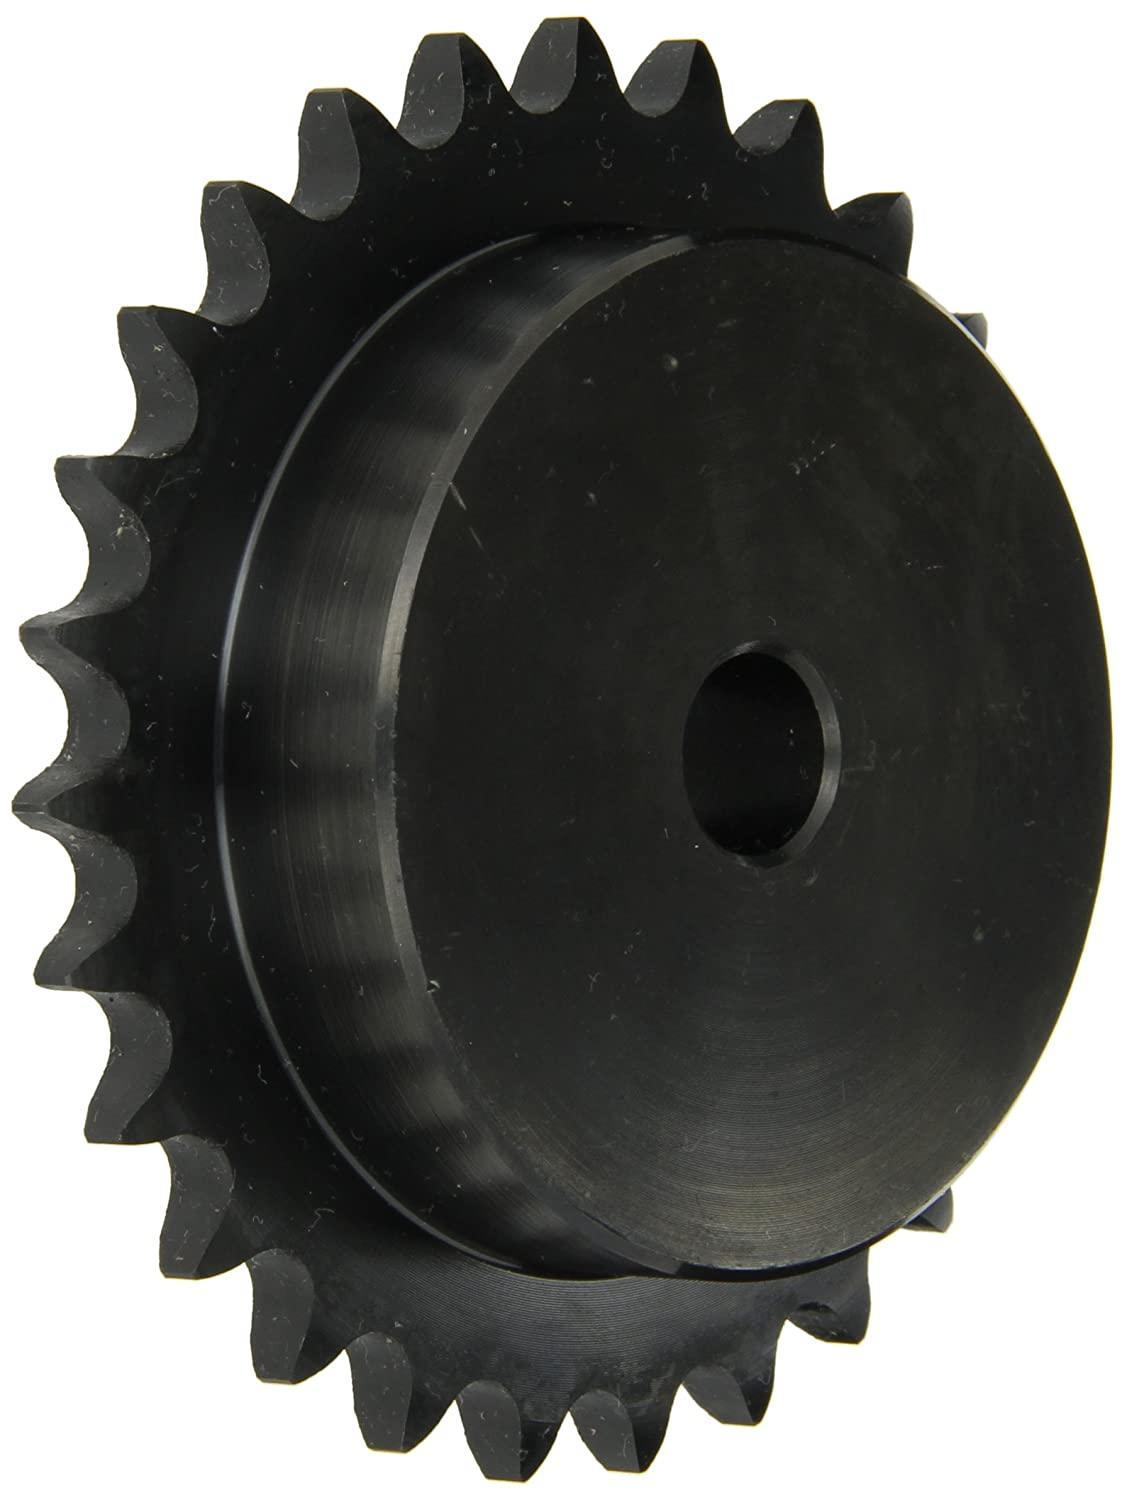 40B18H Roller Chain Sprocket With Stock Bore - Forces Inc